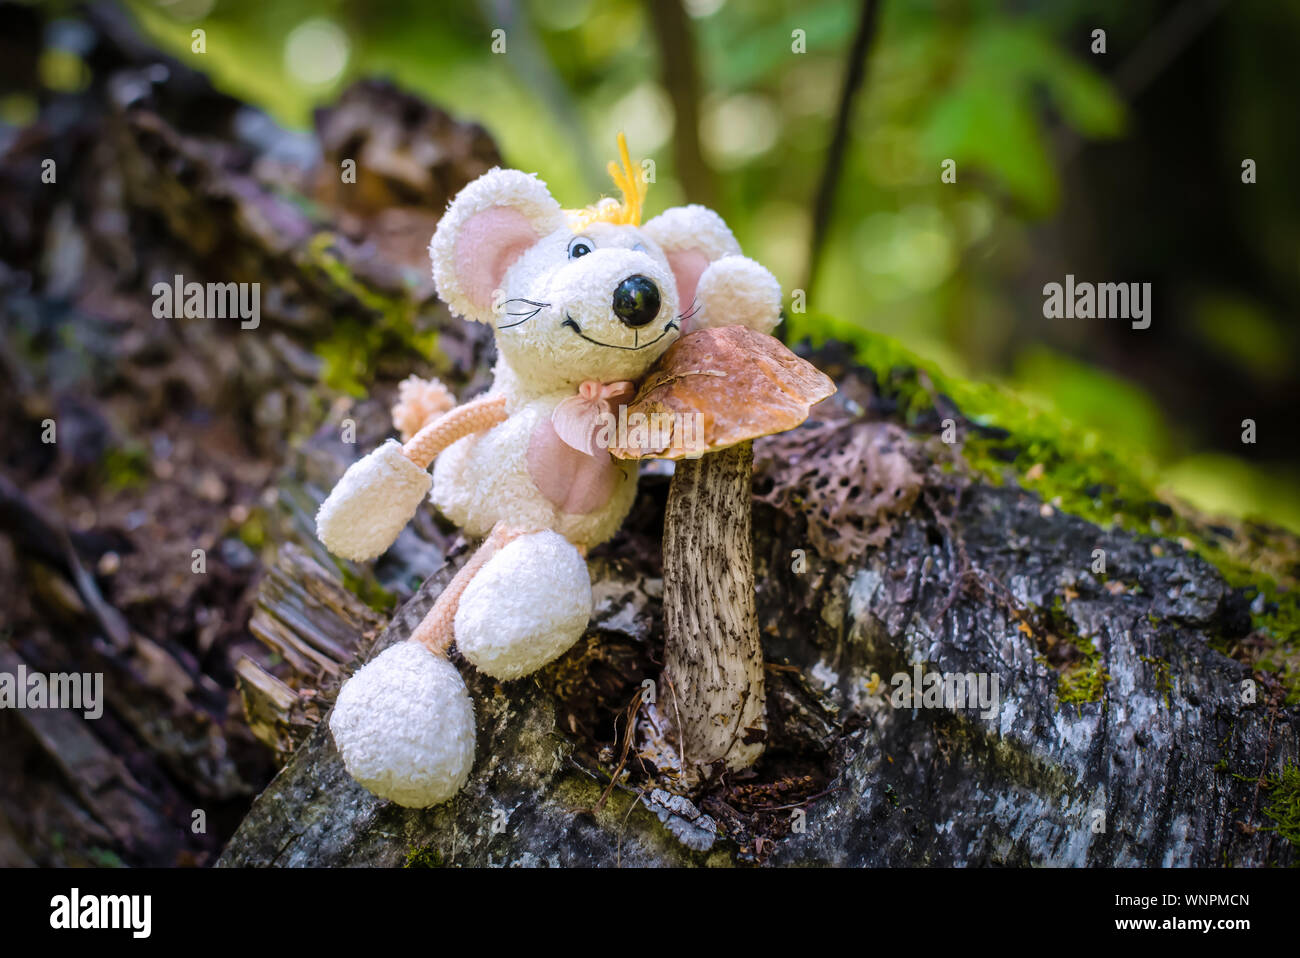 A beautiful picture with a birch mushroom in the forest, with a toy white cute mouse-the symbol of 2020 Stock Photo